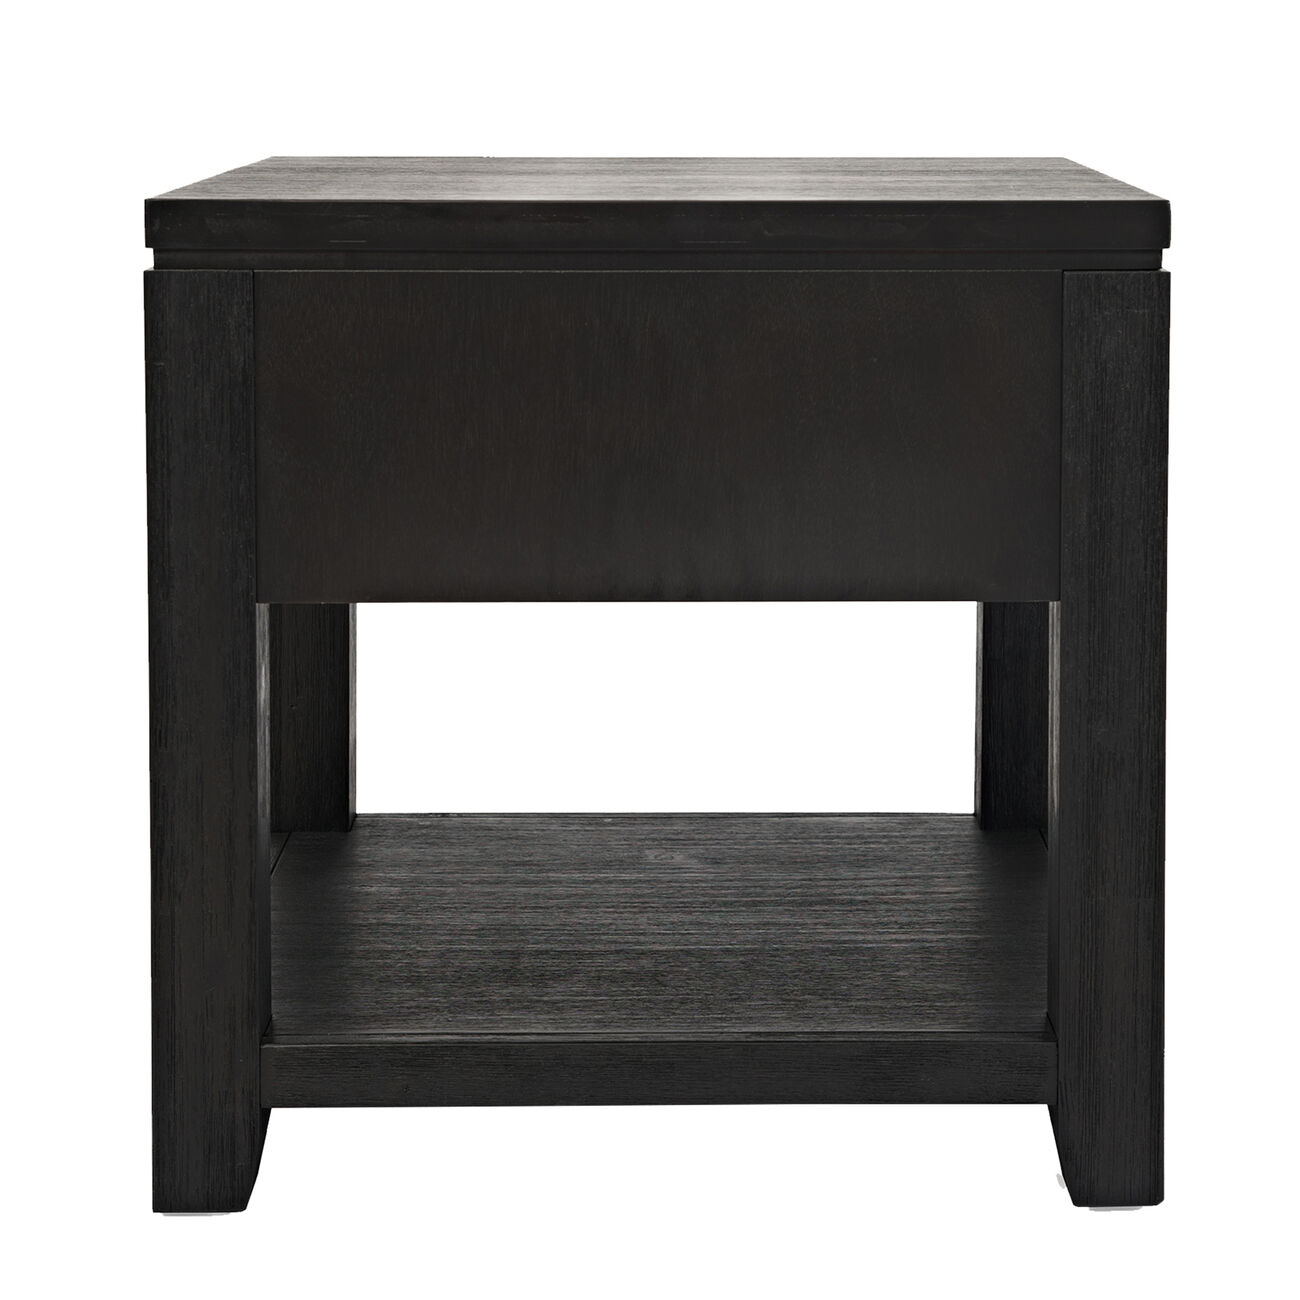 Wooden End Table with Open Bottom Shelf and Single Drawer, Dark Gray